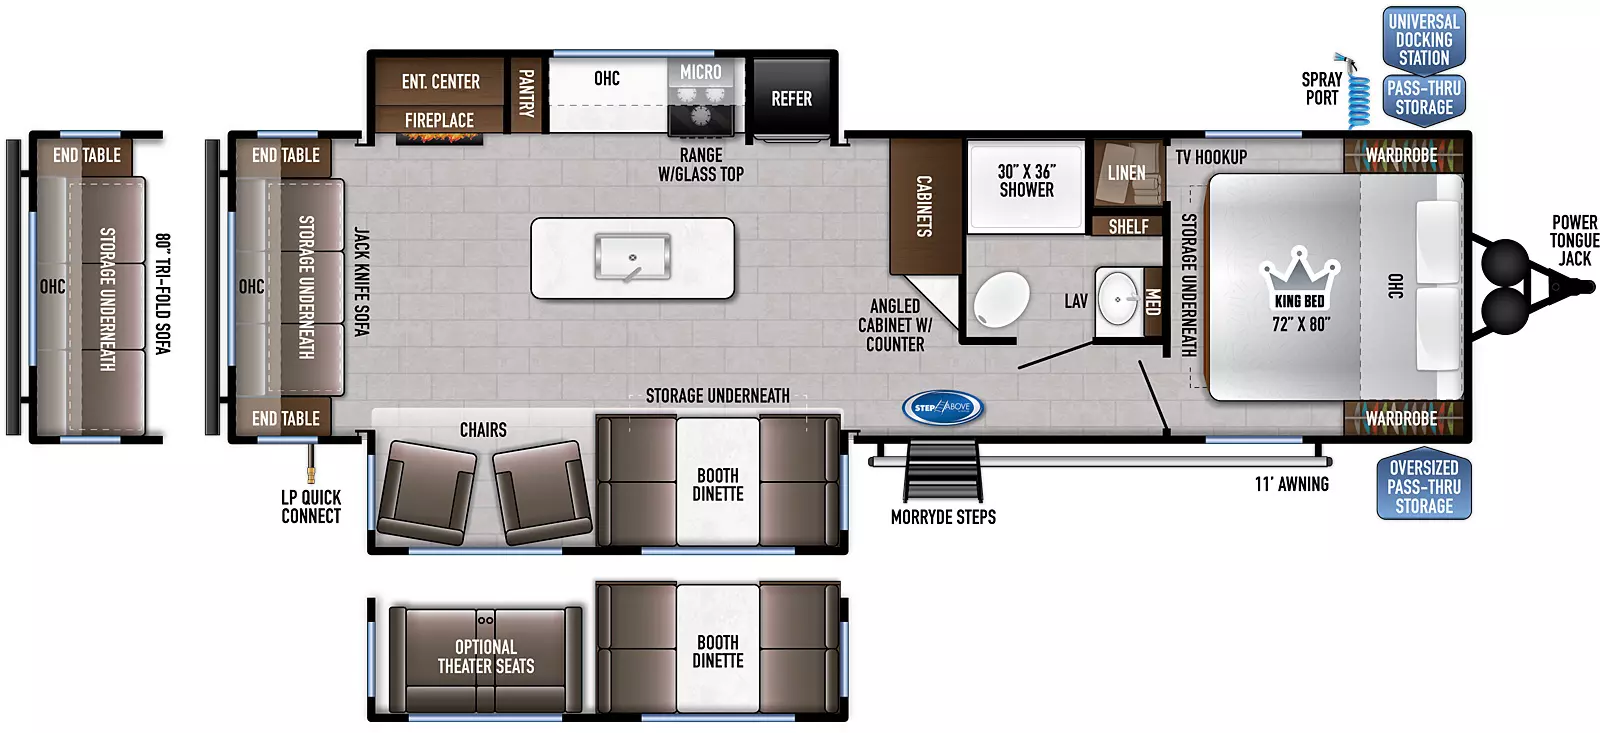 The 292MK has two opposing slides, one on the off-door side and one on the door side, this floorplan has one entry door on the door side. Interior layout from front to back: front bedroom with king bed featuring overhead cabinets, bedside wards, TV hookup, linen cabinet, underbed storage and solid privacy door; side aisle bathroom with medicine cabinet above the sink, cabinet shelf, shower and porcelain toilet; kitchen living dining area has large cabinets and angled cabinet with counter, kitchen island with residential sink, off-door side slide features refrigerator, 3-burner cooktop with oven, overhead microwave and cabinets, kitchen counter space, pantry and entertainment center with fireplace; opposing door side slide has a booth dinette with storage underneath, two large picture windows, and two free standing recliners facing entertainment center and fireplace. jackknife sofa with 2 end tables and overhead cabinets along back wall! Exterior from front to back: Power tongue jack, oversized pass-thru storage on door side, universal docking station in pass-thru on off-door side with spray port; solid steps at entry door on door side, LP quick connect in door side rear and 11' awning.